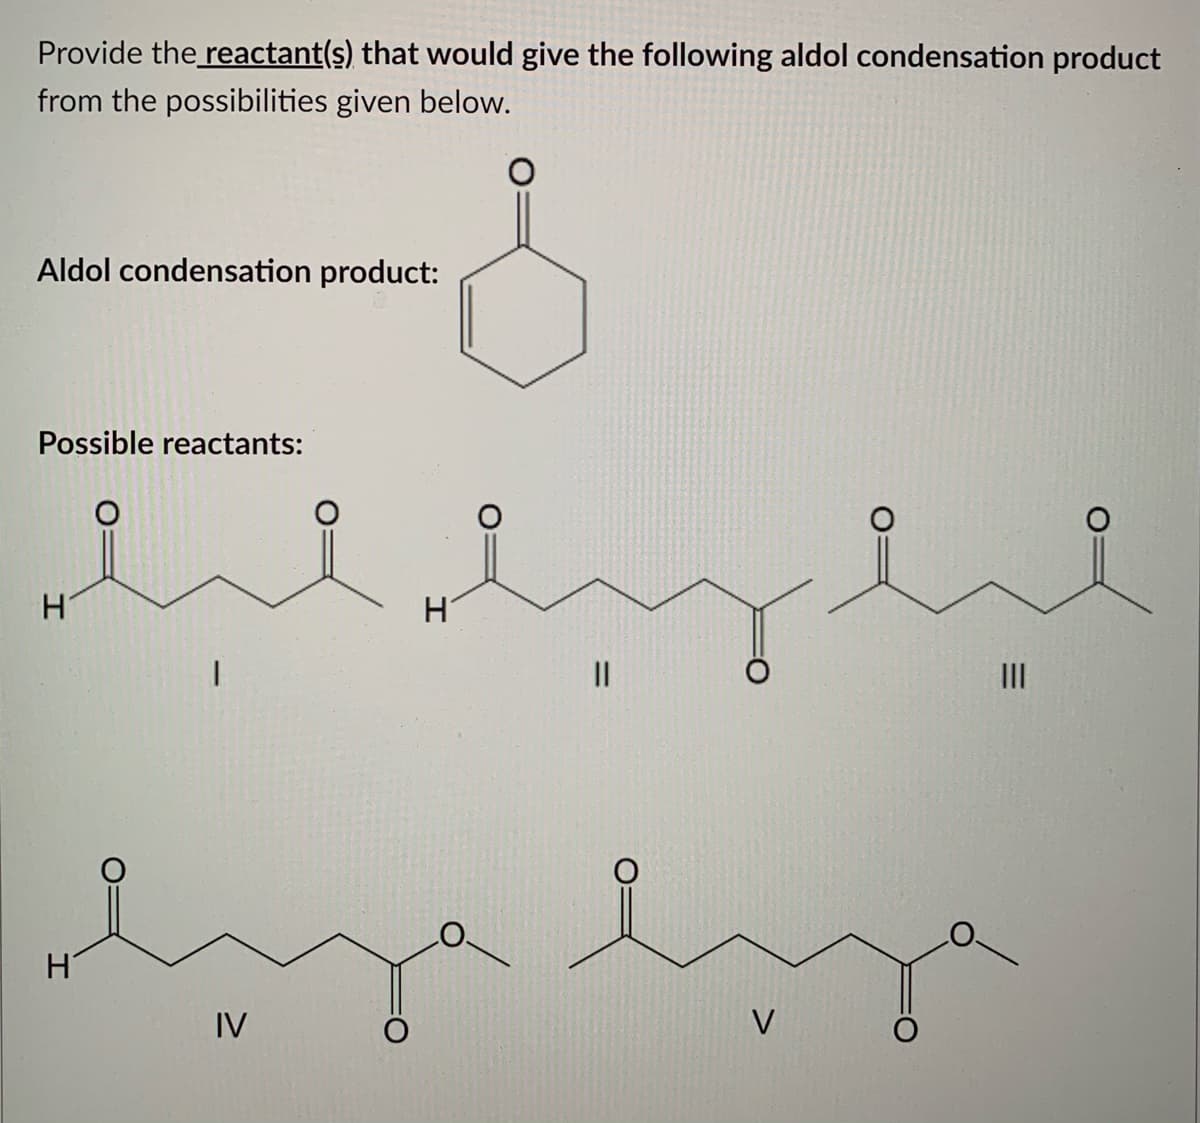 Provide the reactant(s) that would give the following aldol condensation product
from the possibilities given below.
Aldol condensation product:
Possible reactants:
II
II
H
IV
V
